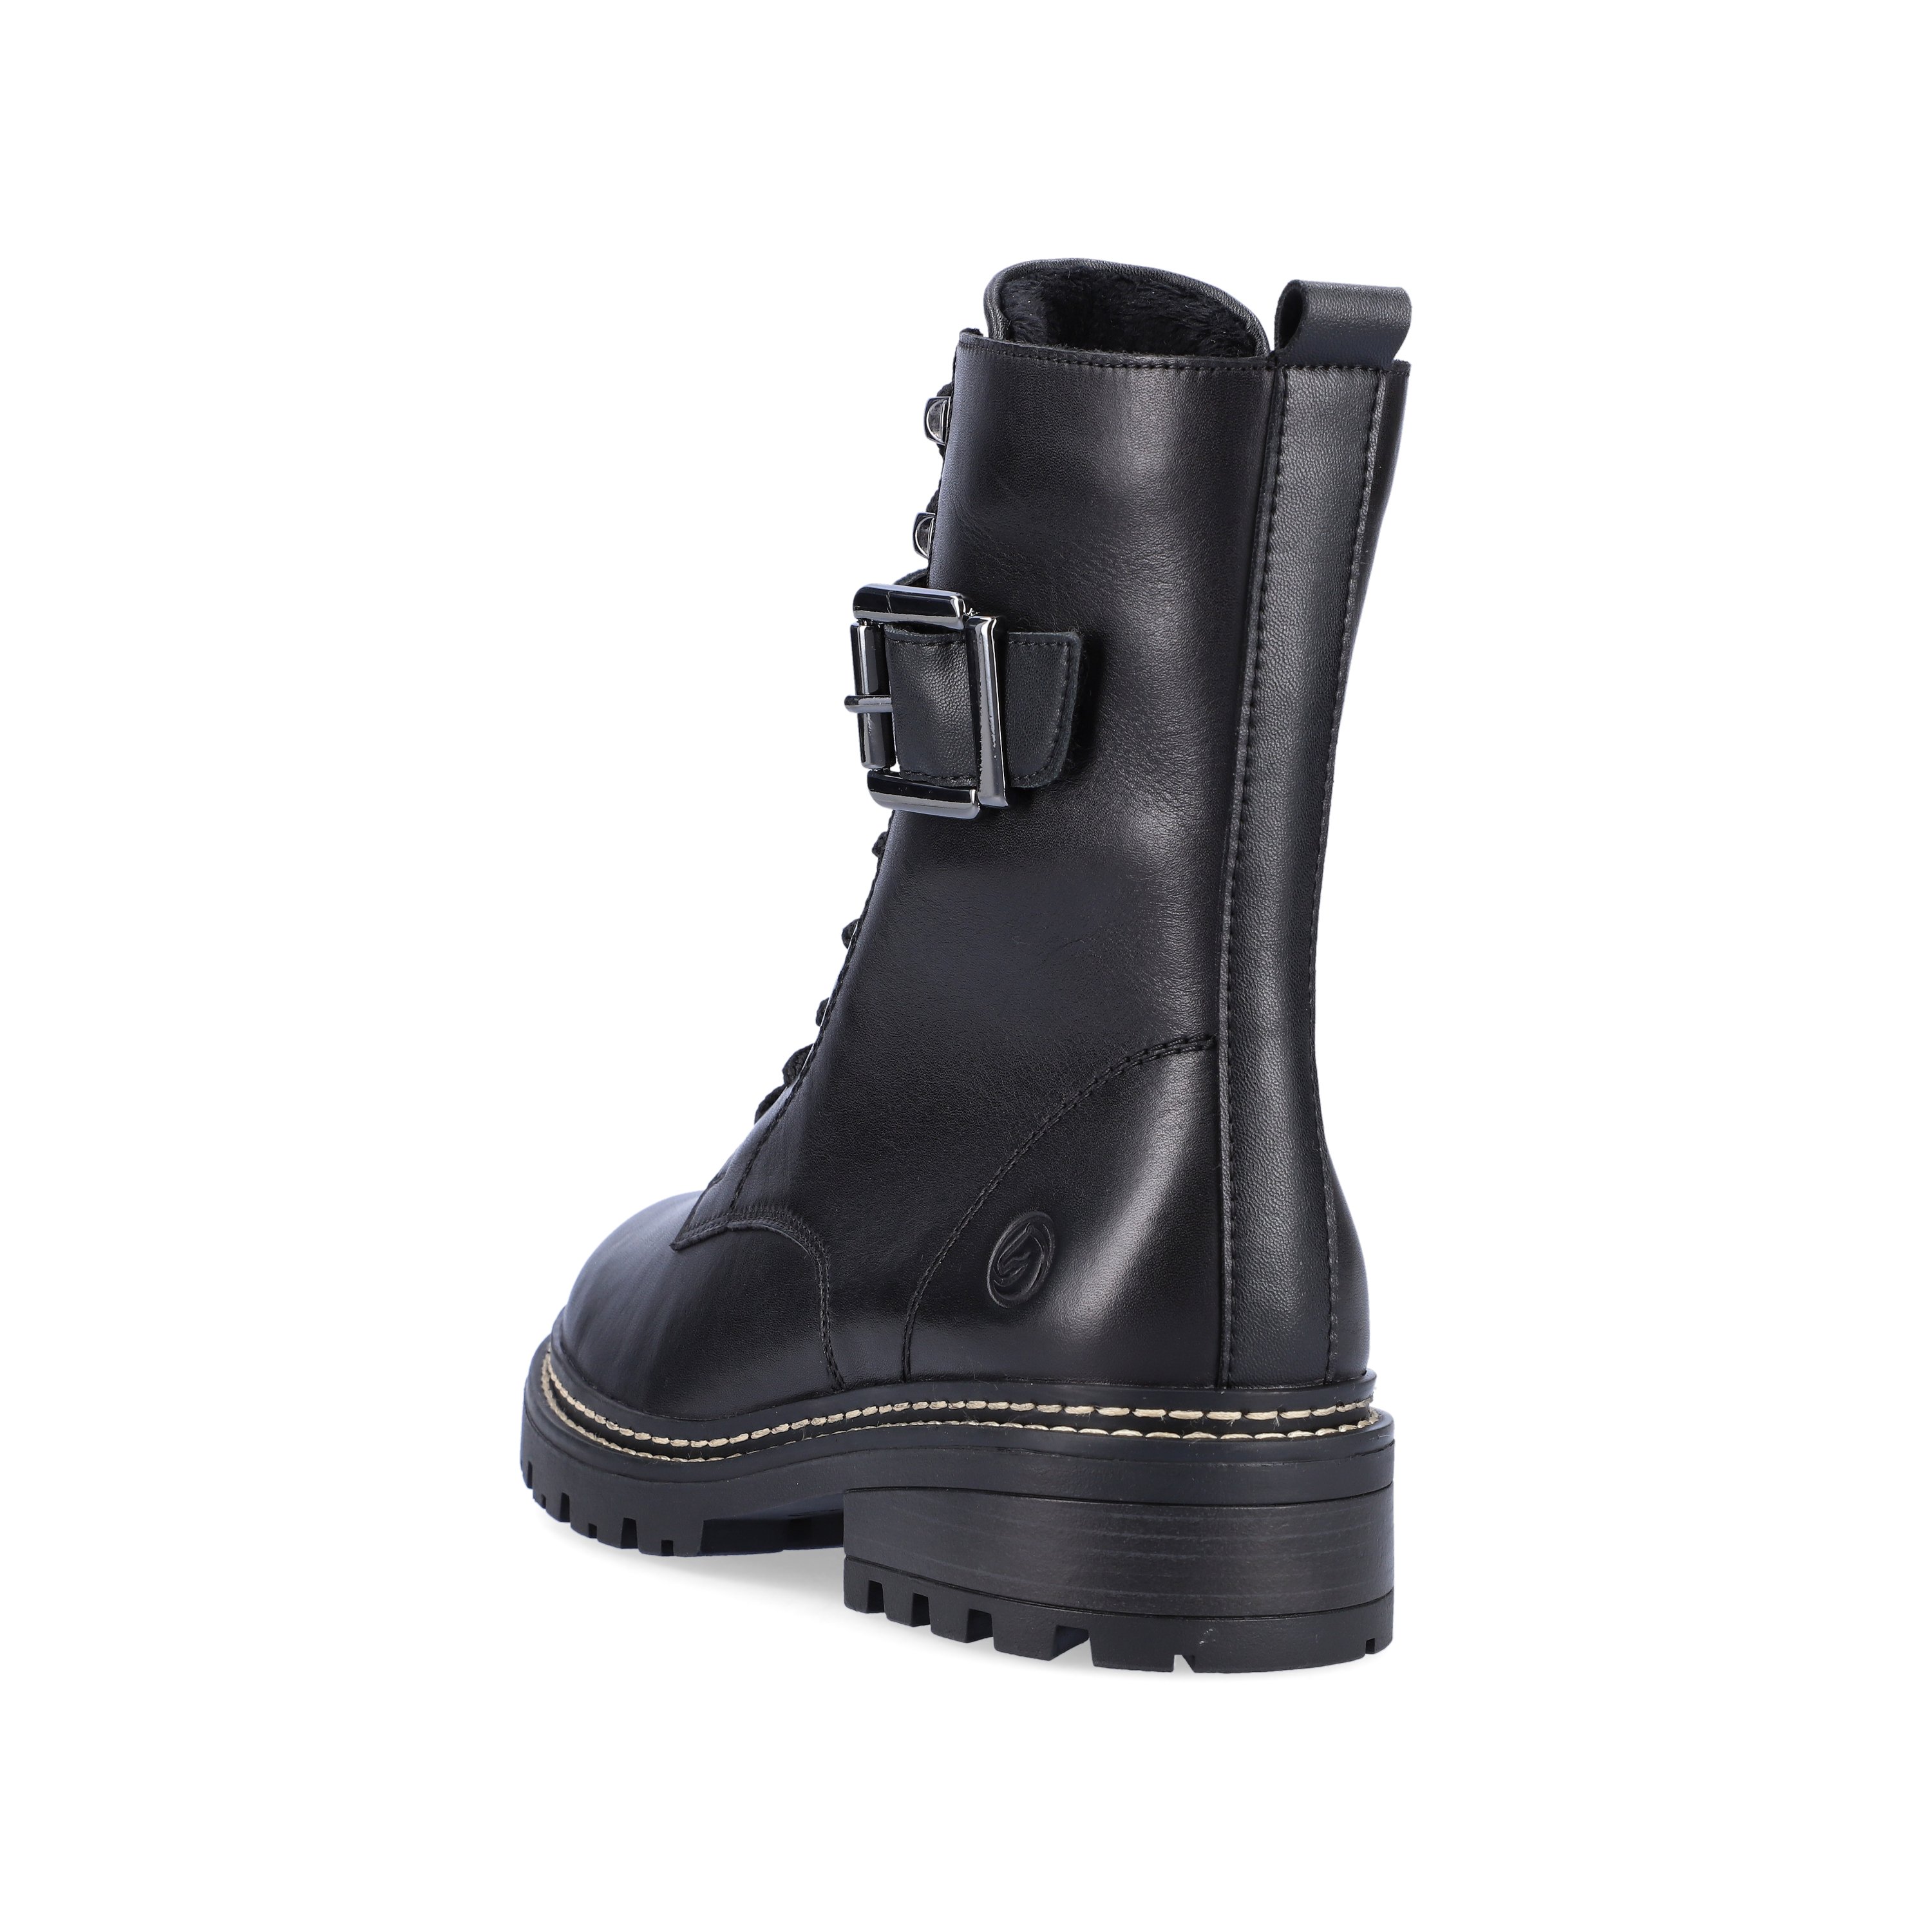 Jet black remonte women´s biker boots D0B73-01 with cushioning profile sole. Shoe from the back